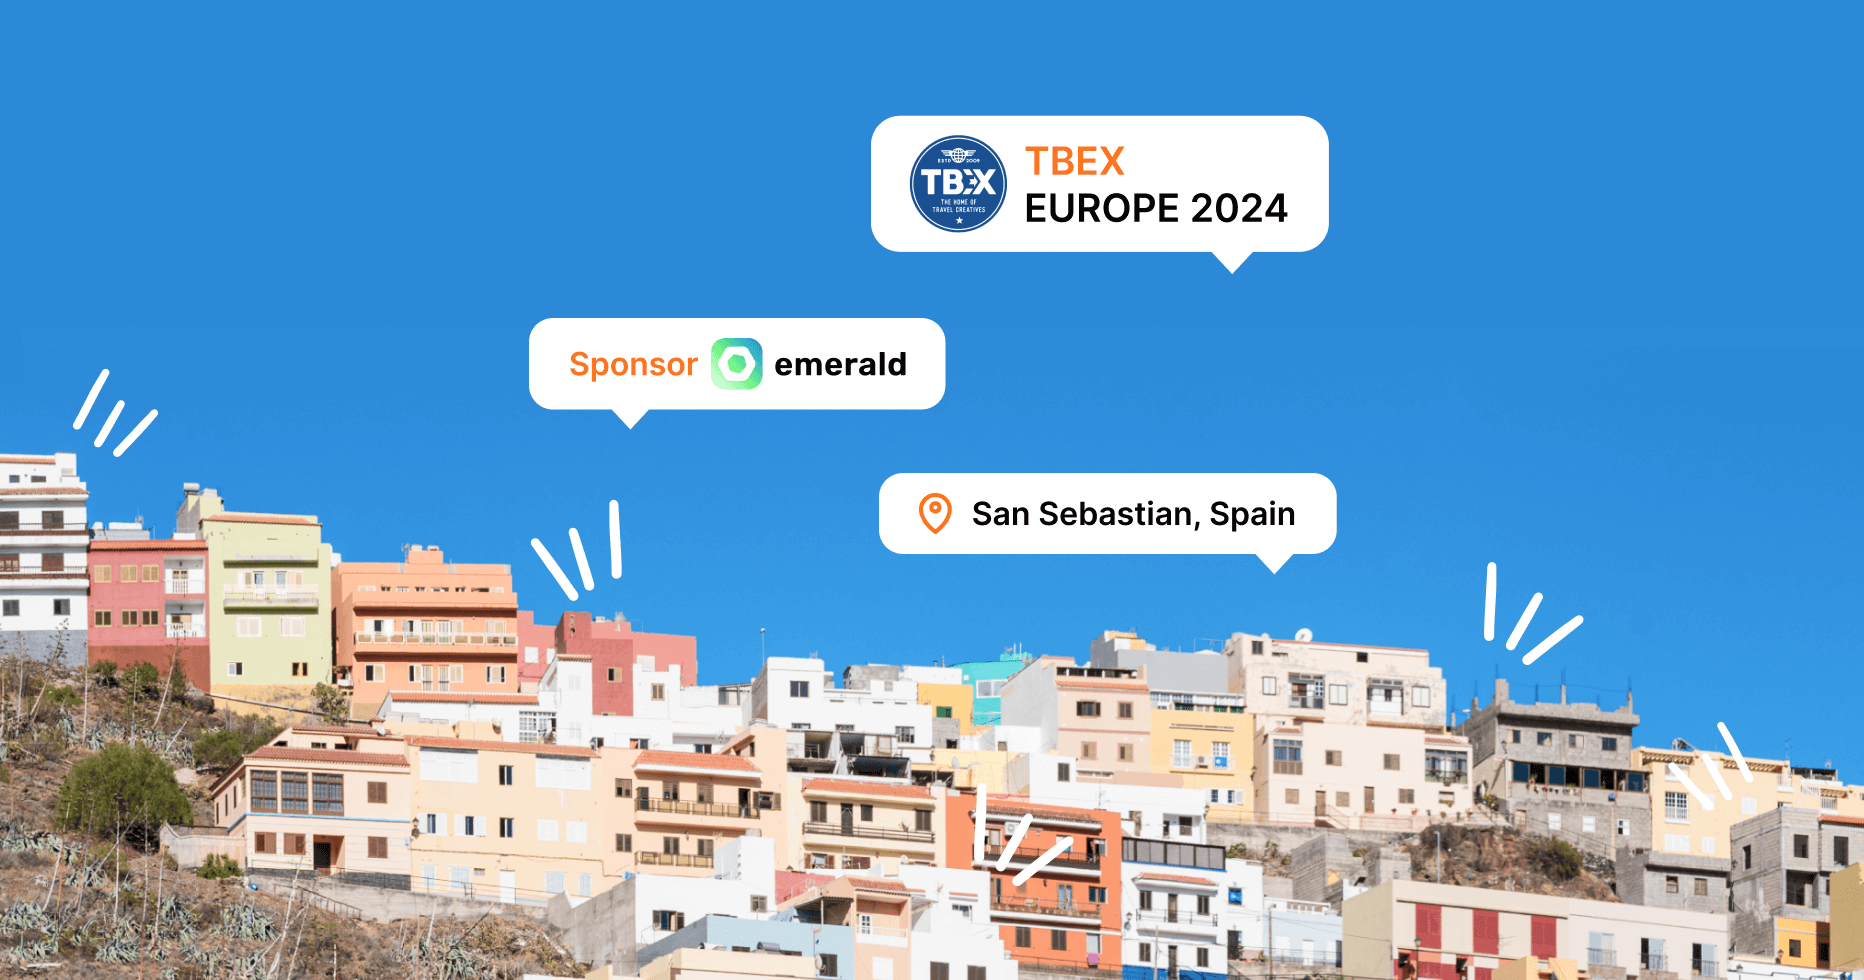 Let's Meet Up and Network at TBEX Europe 2024!